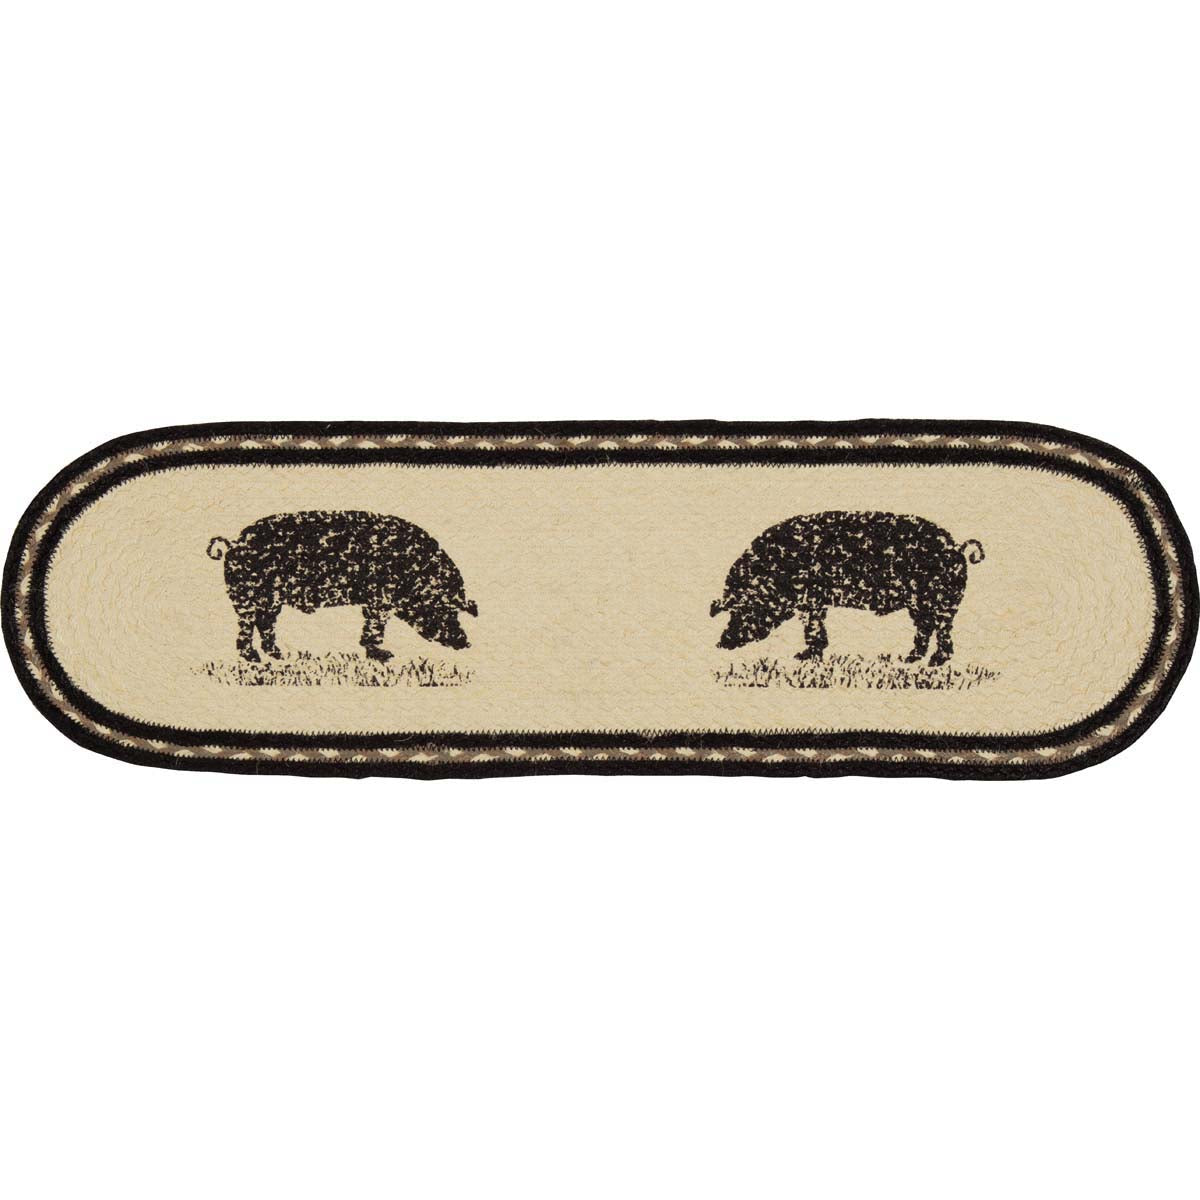 34089-Sawyer-Mill-Charcoal-Pig-Jute-Stair-Tread-Oval-Latex-8.5x27-image-5